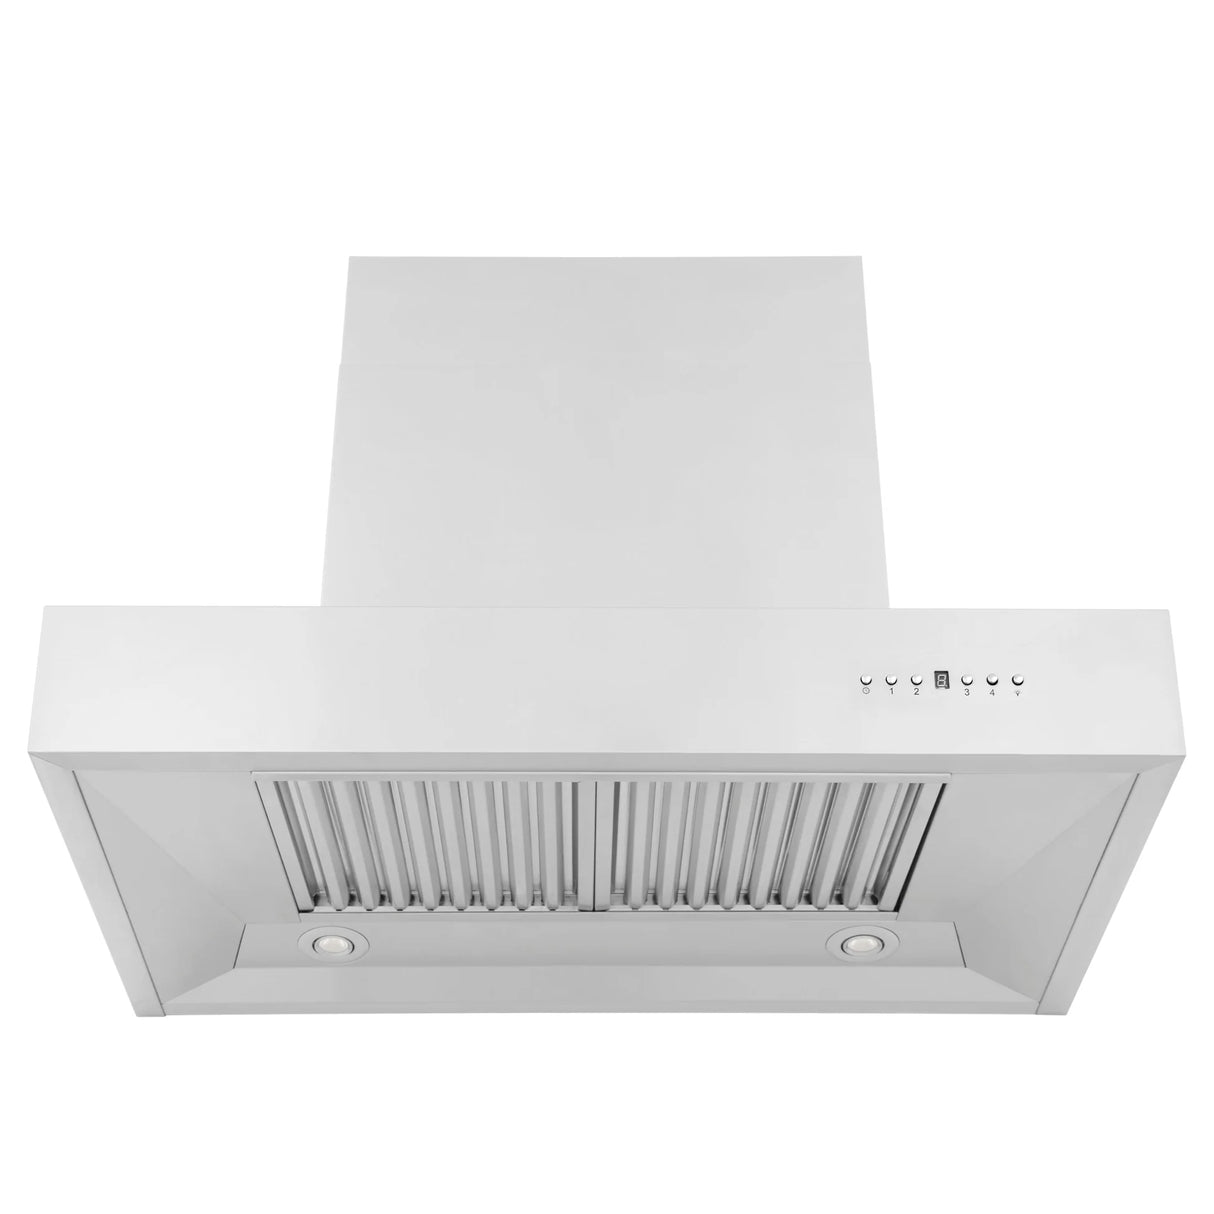 ZLINE 48" Ducted Professional Wall Mount Range Hood in Stainless Steel